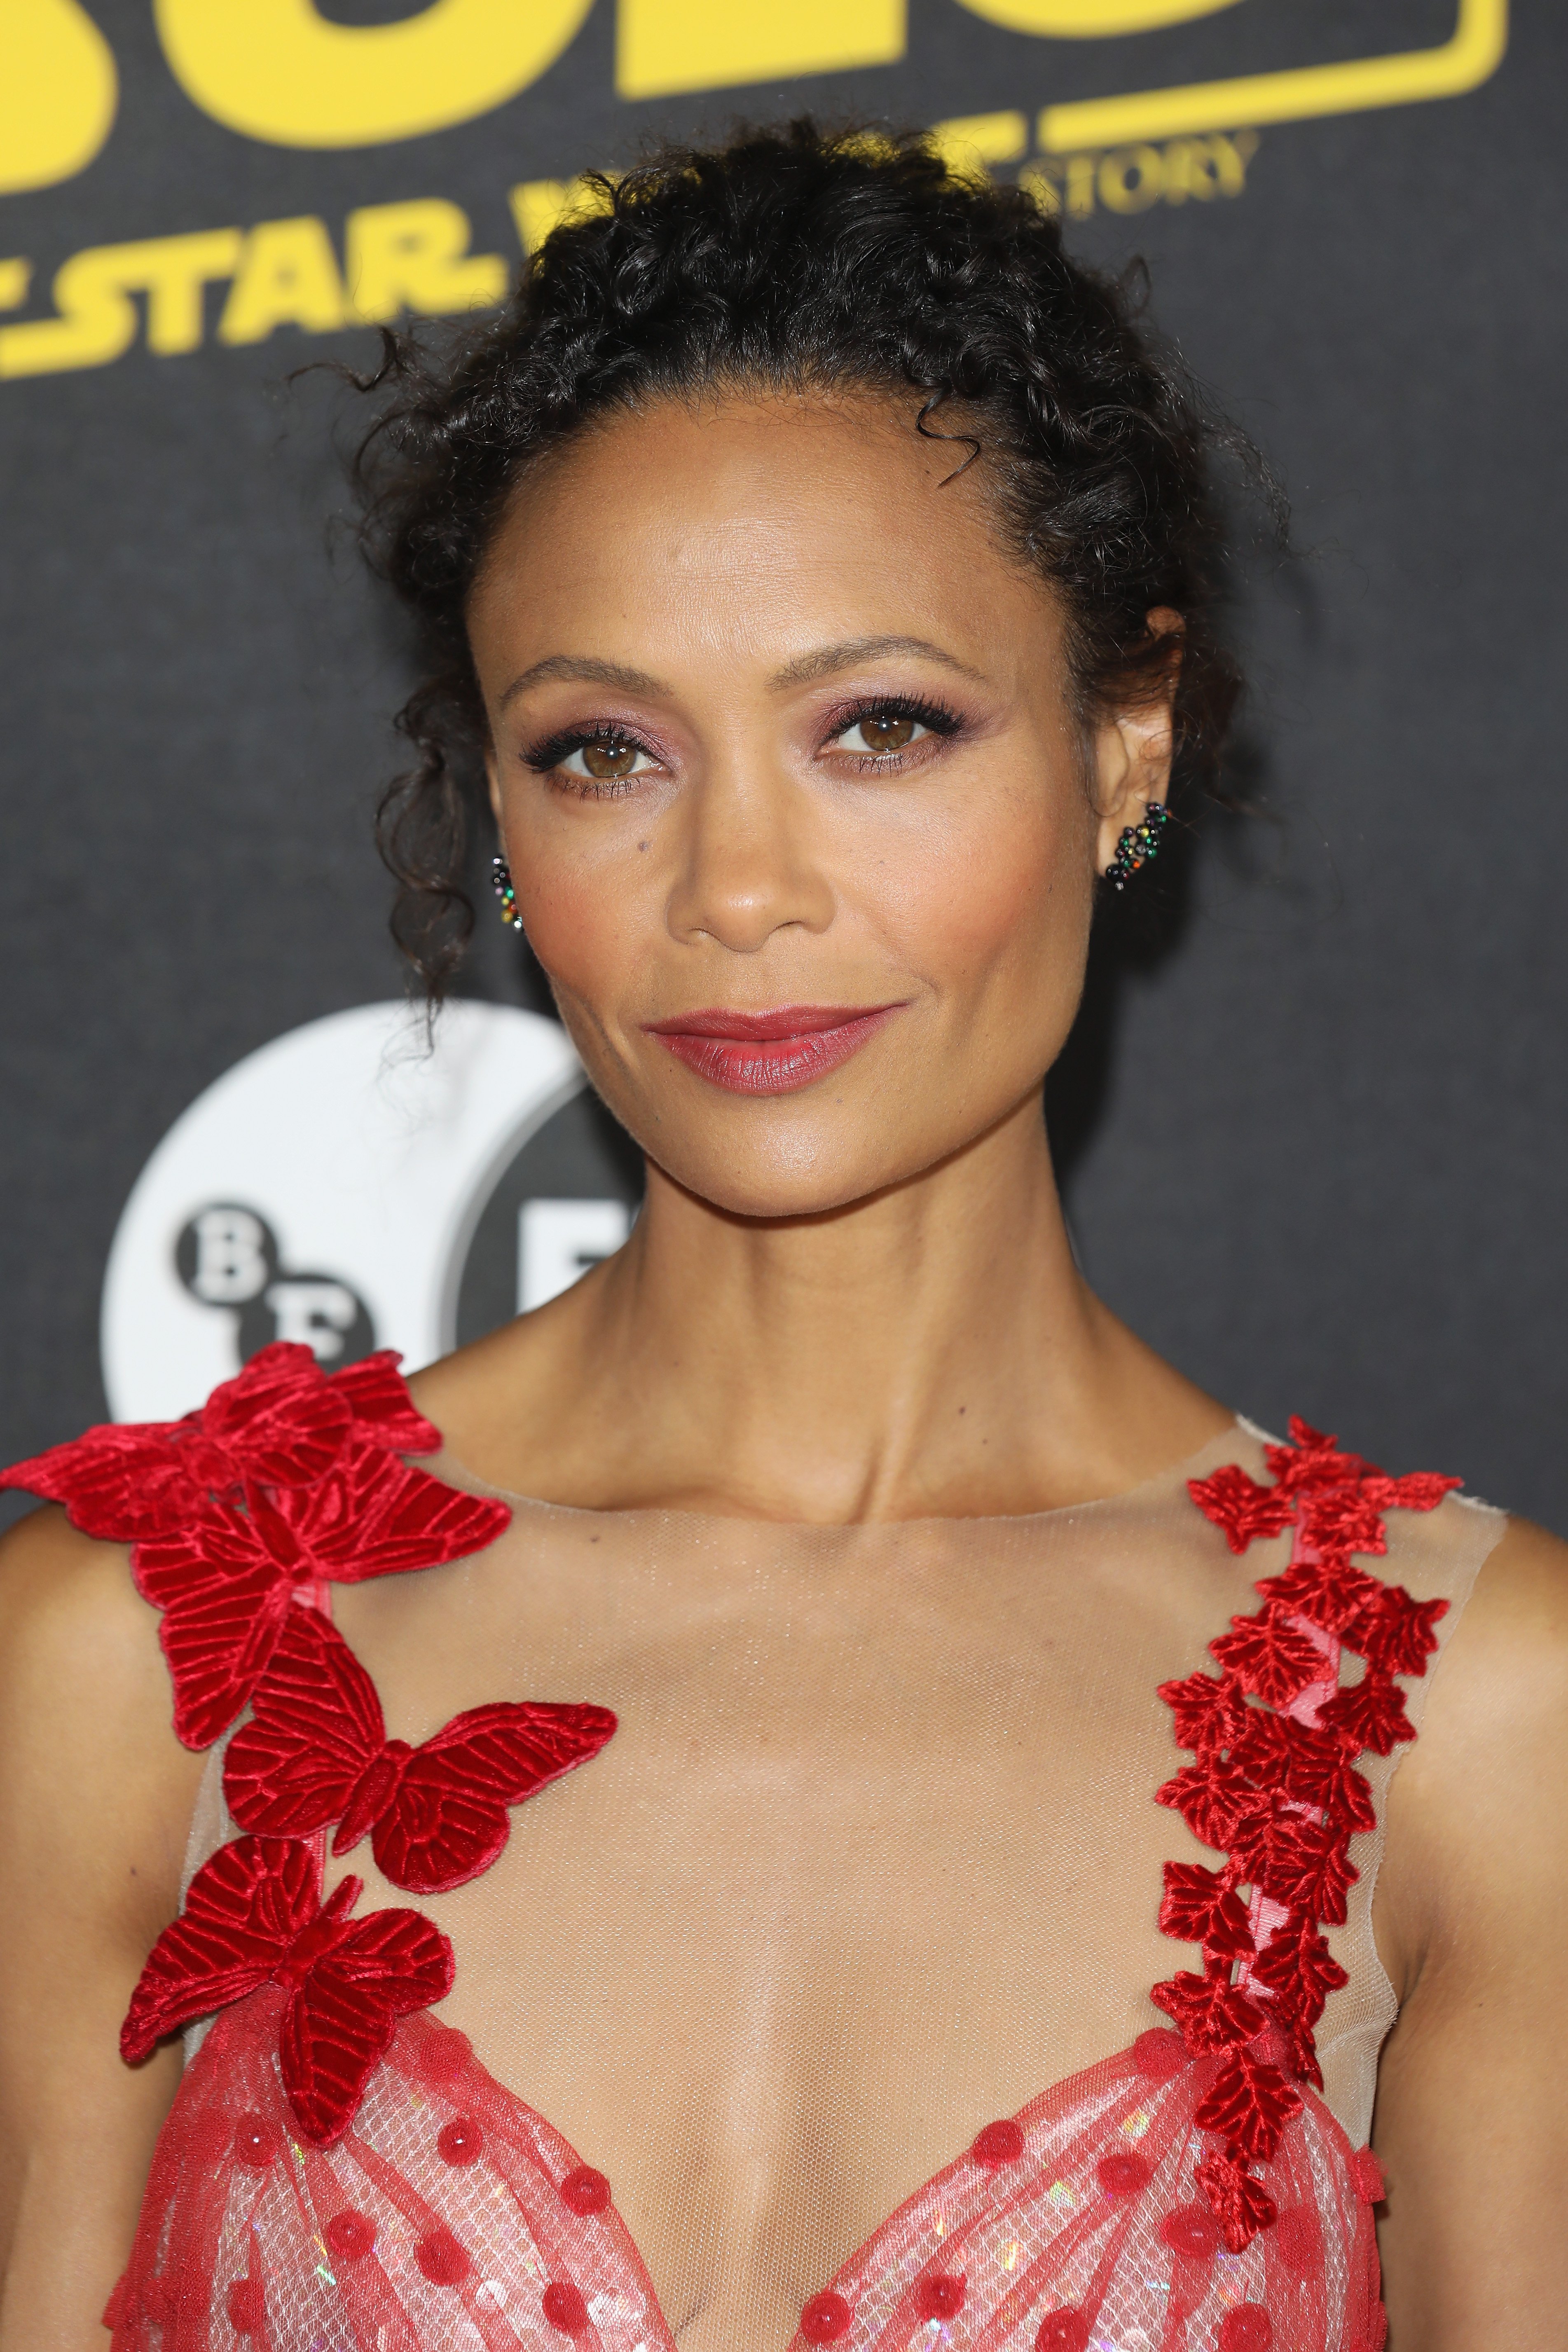 Thandie Newton at the special BFI screening of "Solo: A Star Wars Story" on May 23, 2018 | Source: Getty Images